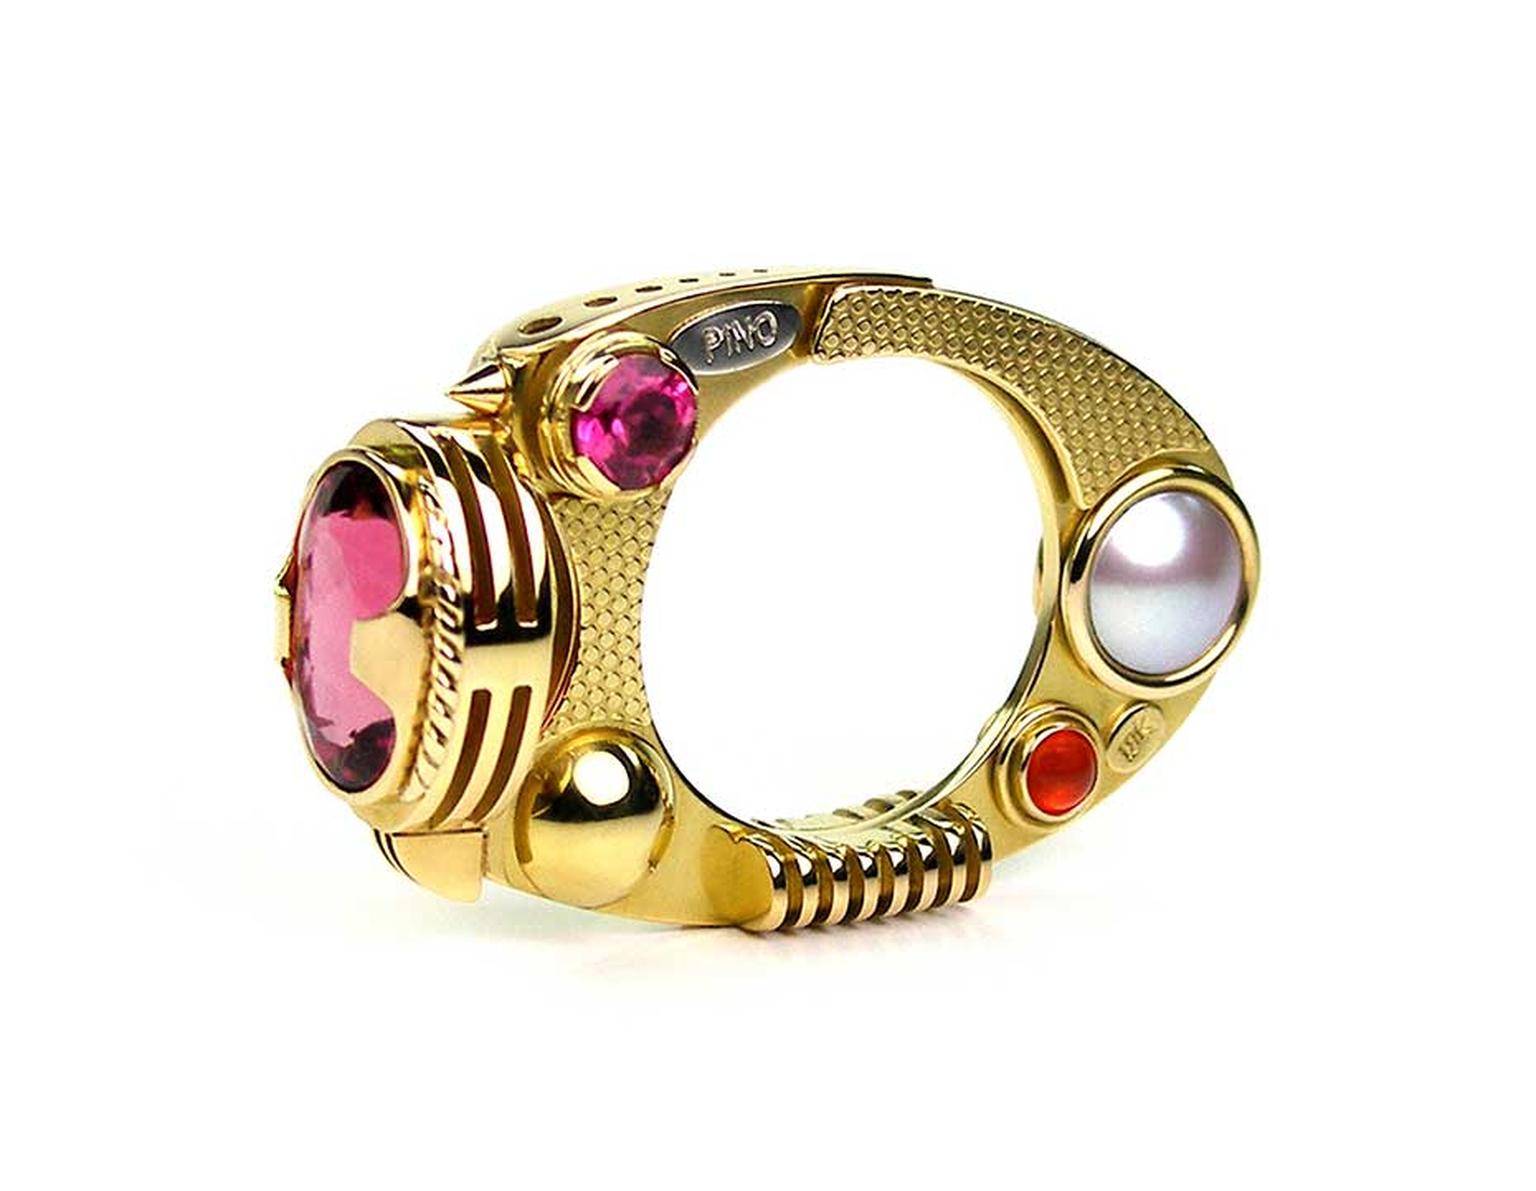 Claudio Pino ring in gold with pink tourmalines, pearls and carnelian at the Aaron Faber Gallery.